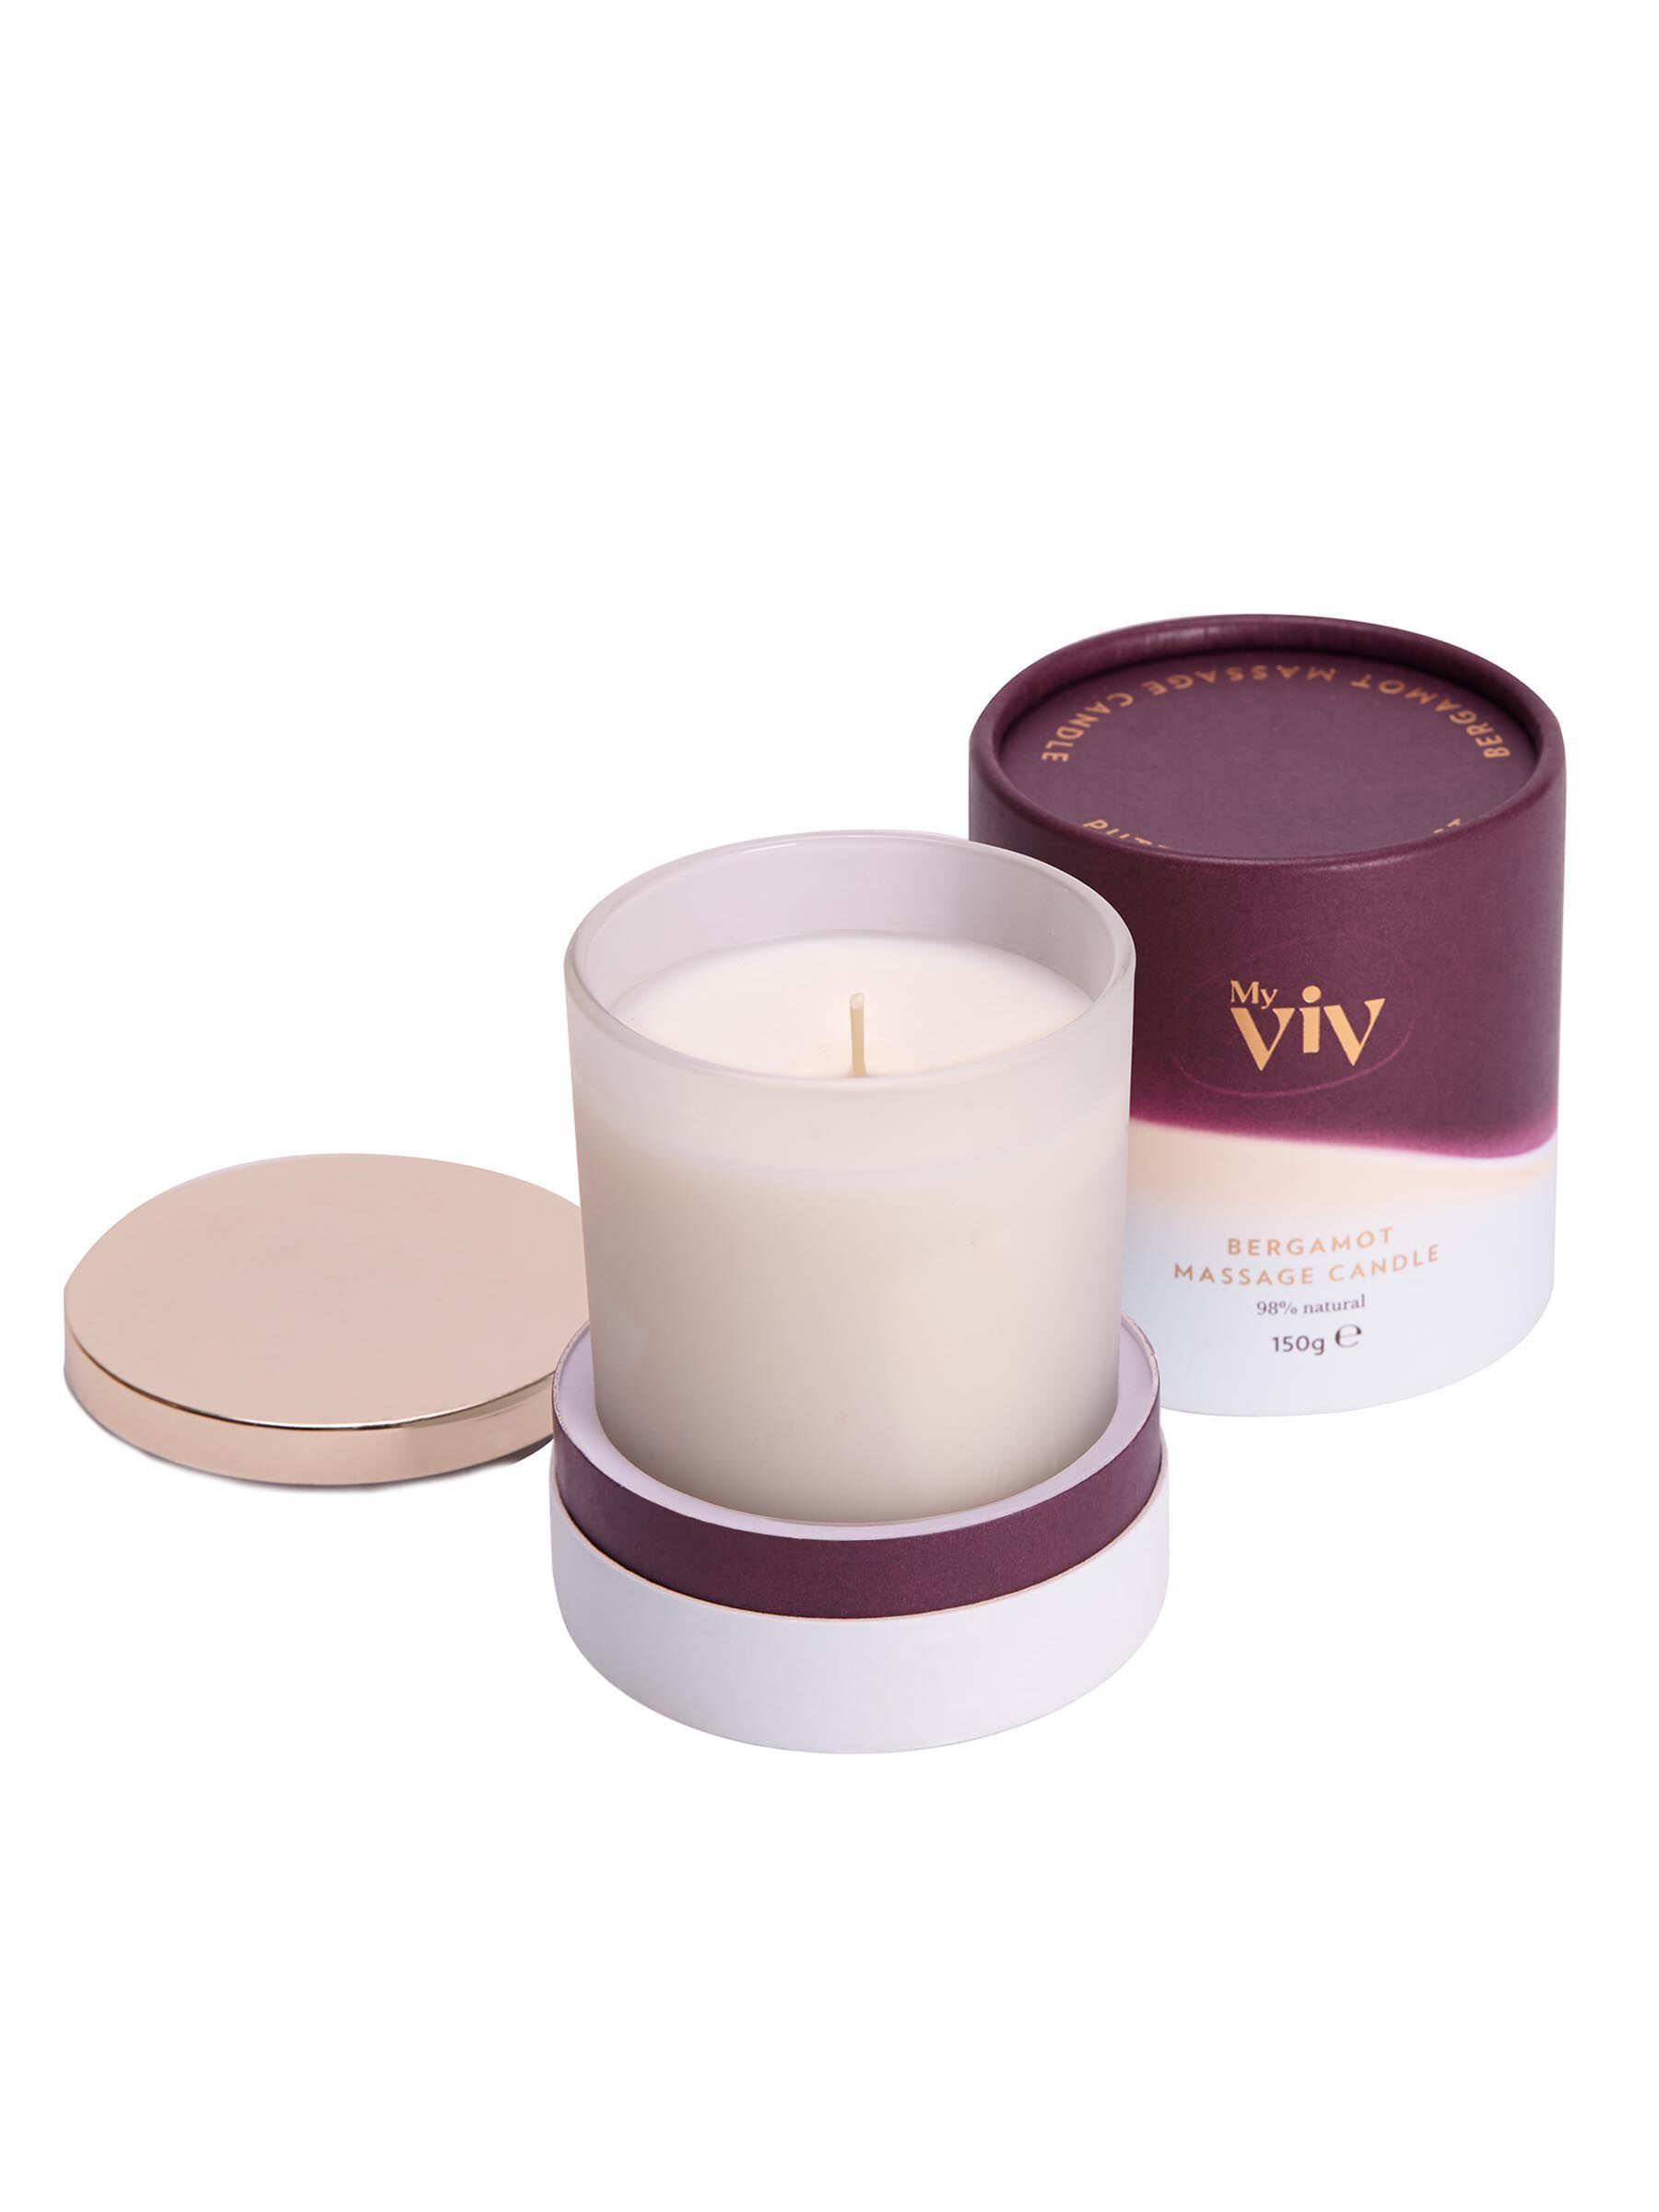 Gently fragranced with relaxing lavender and calming amber, this luxurious My Viv candle creates a sensual atmosphere for you to enjoy.